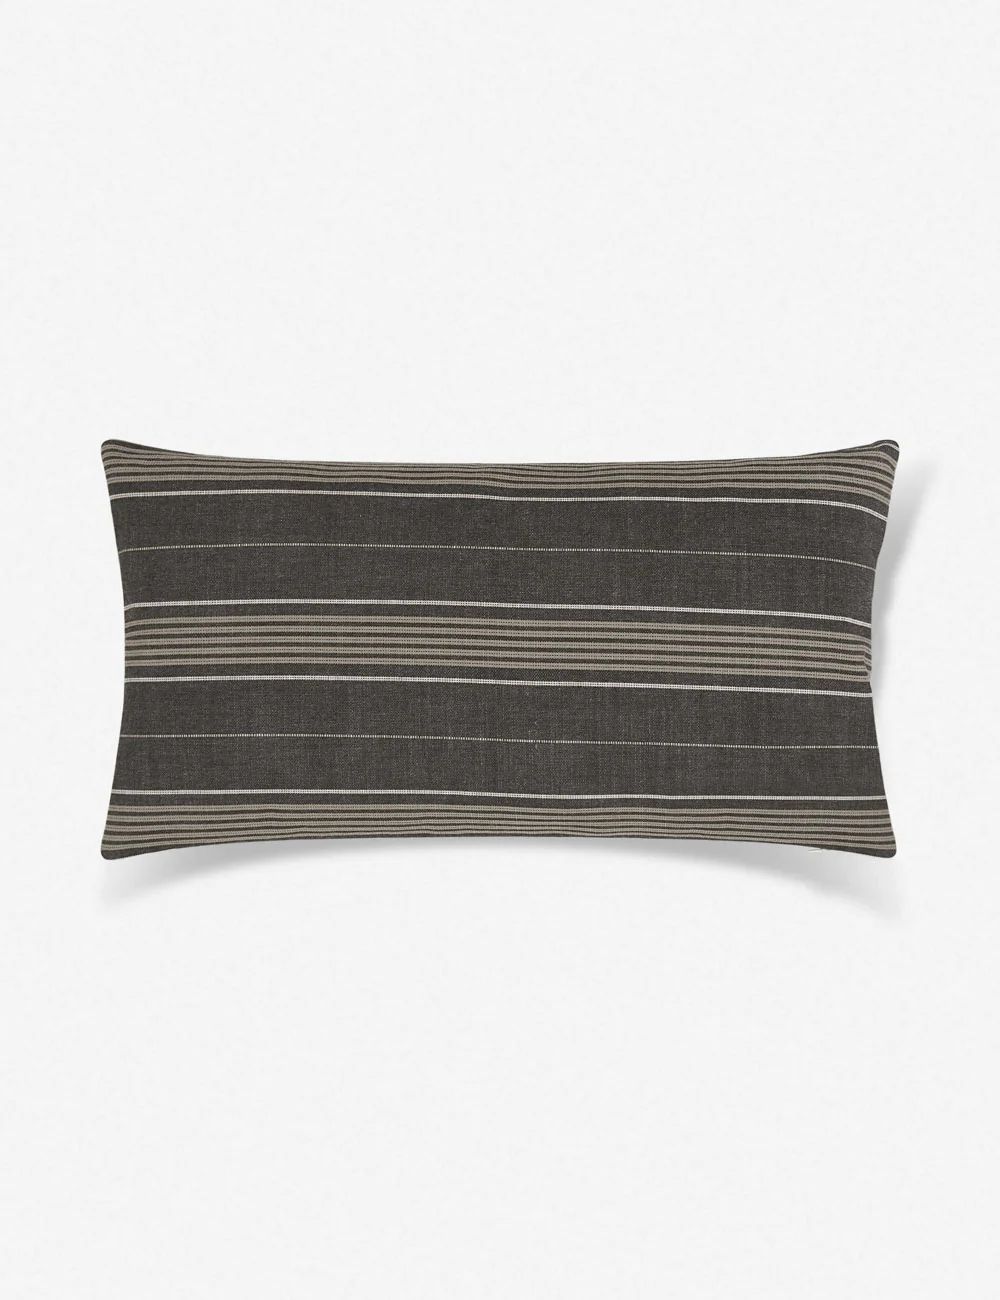 Byron Indoor / Outdoor Pillow | Lulu and Georgia 